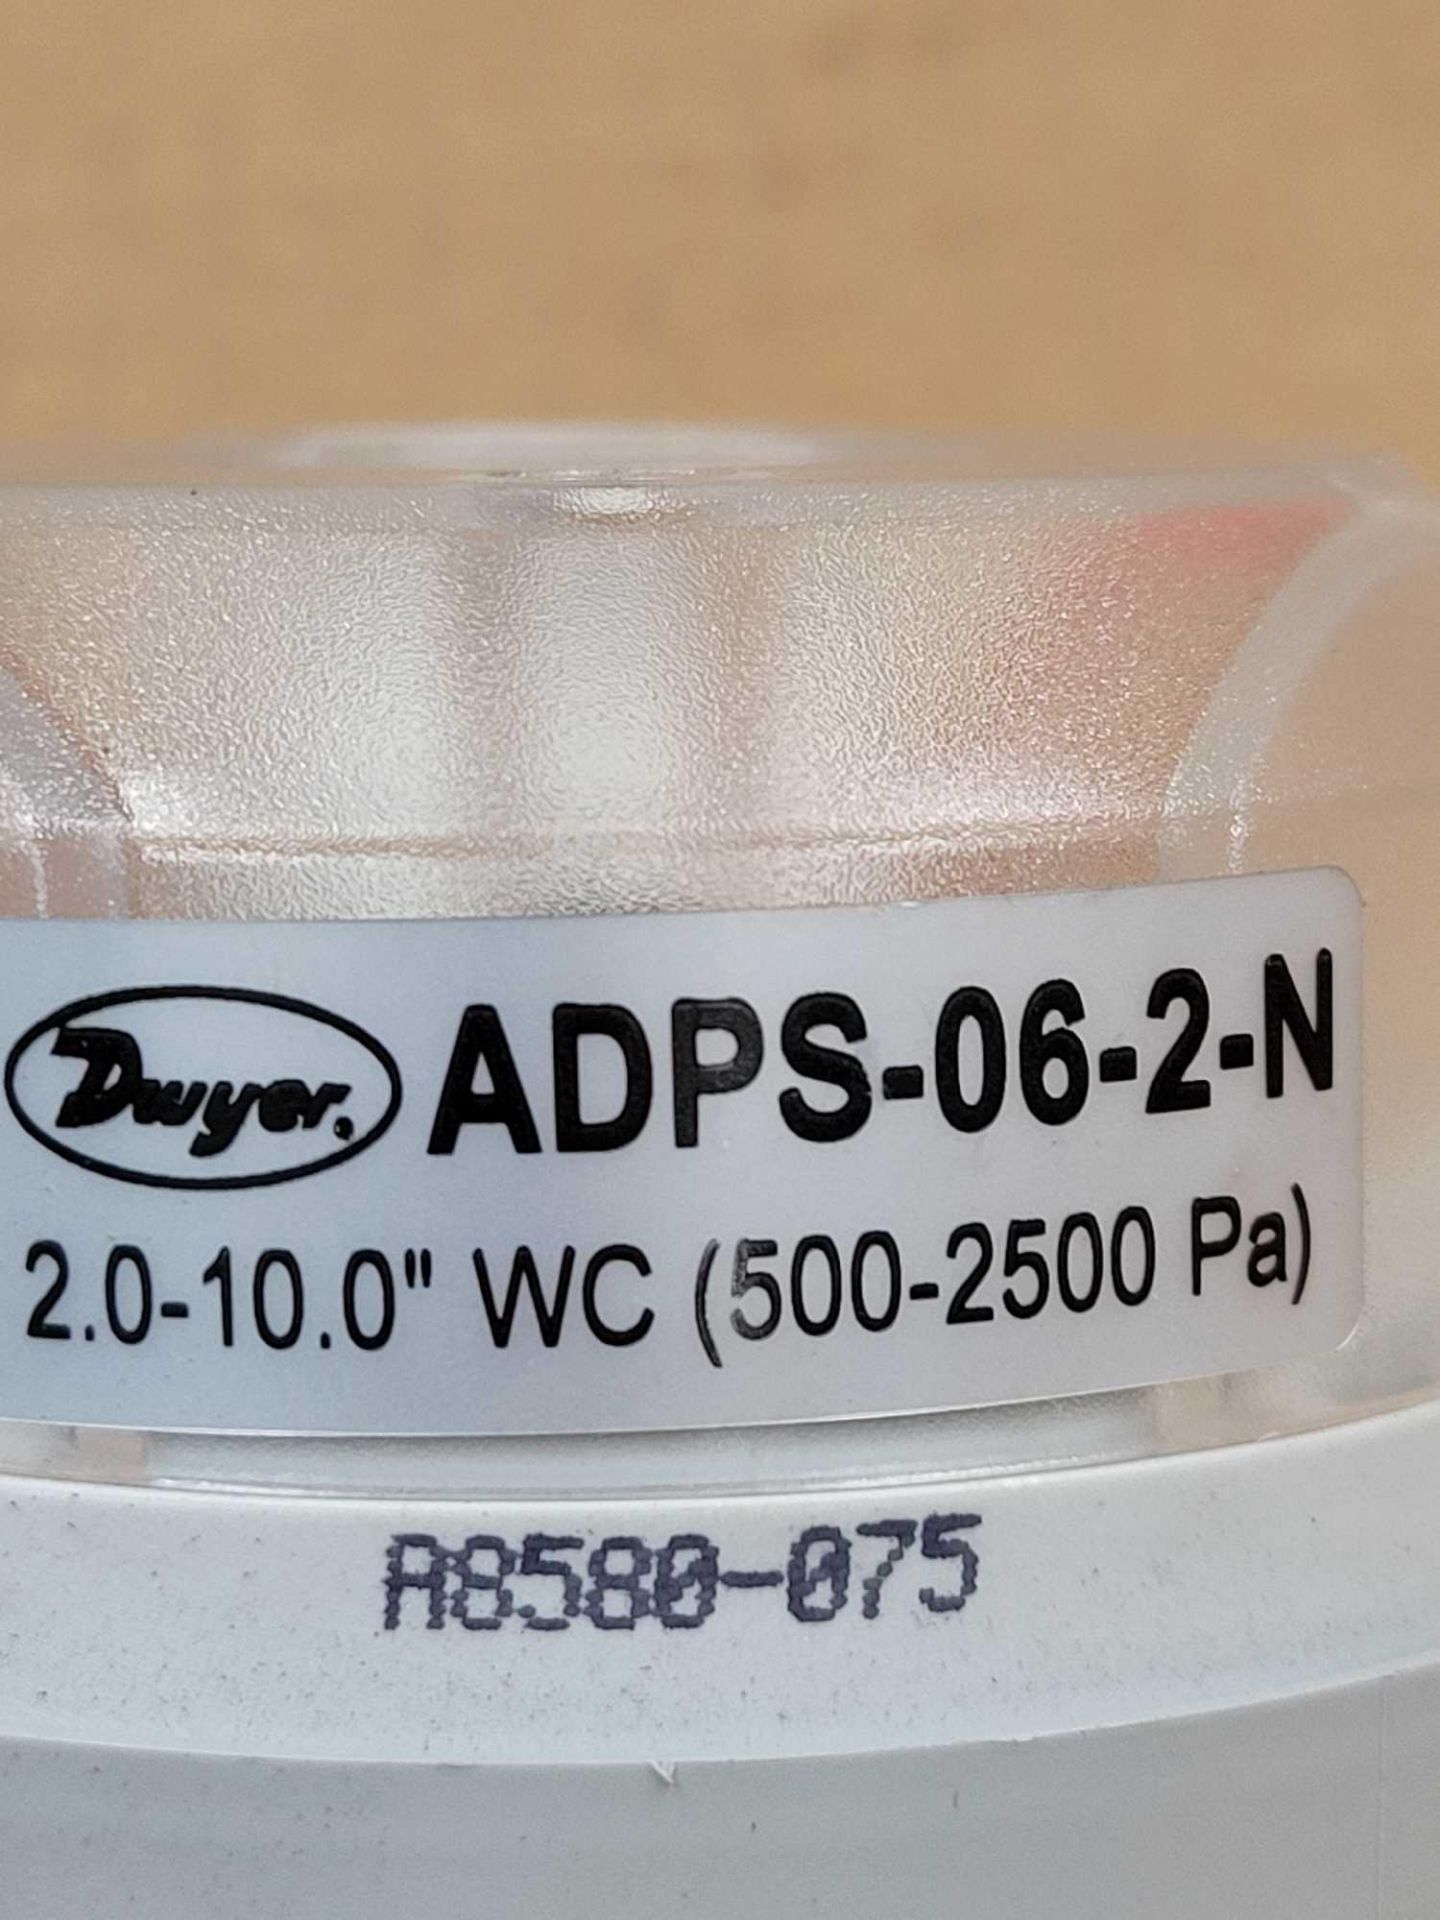 LOT OF 2 DWYER / (1) ADPS-03-2-N-C / (1) ADPS-06-2-N / Differential Pressure Switch / Lot Weight: 0. - Image 6 of 7